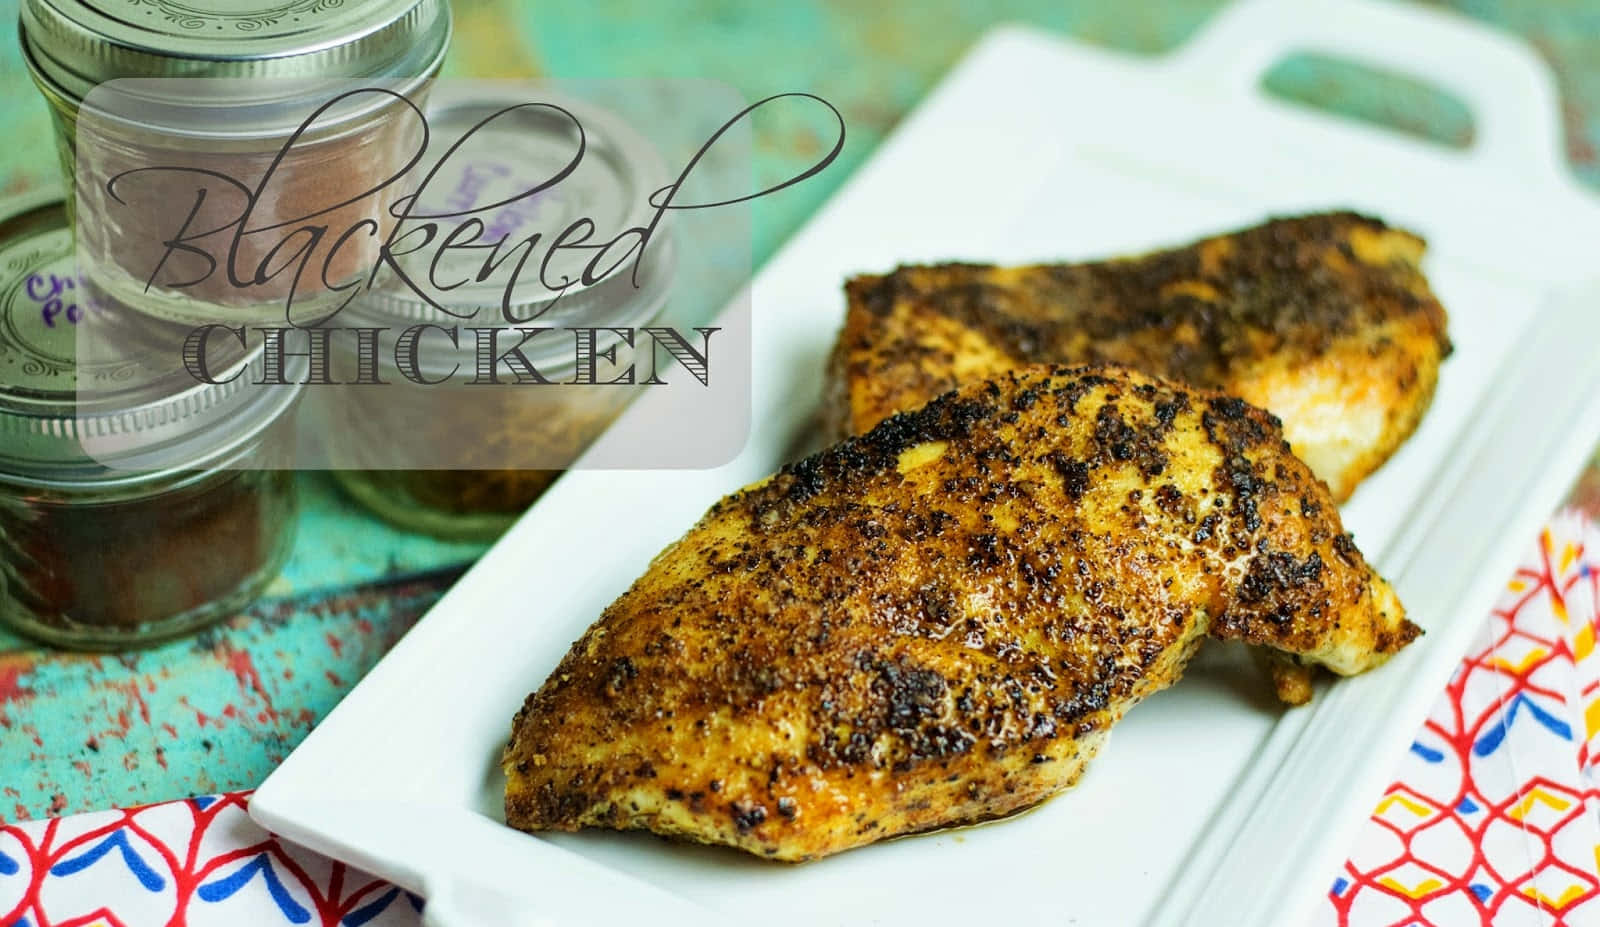 Enjoy juicy blackened chicken with your family and friends Wallpaper